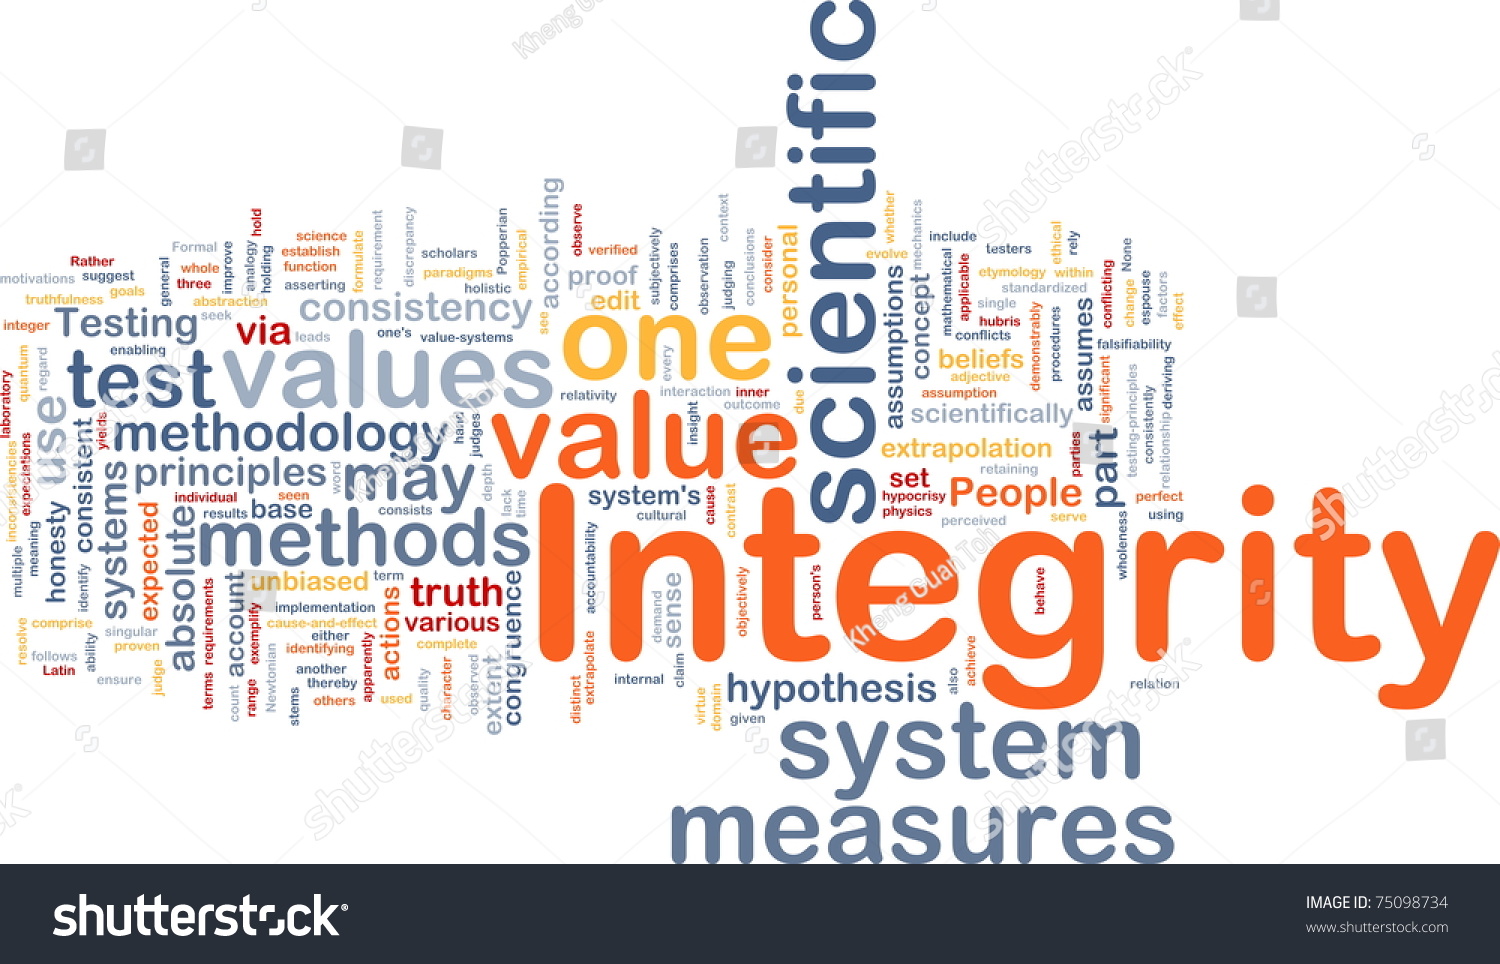 The True Meaning of Integrity